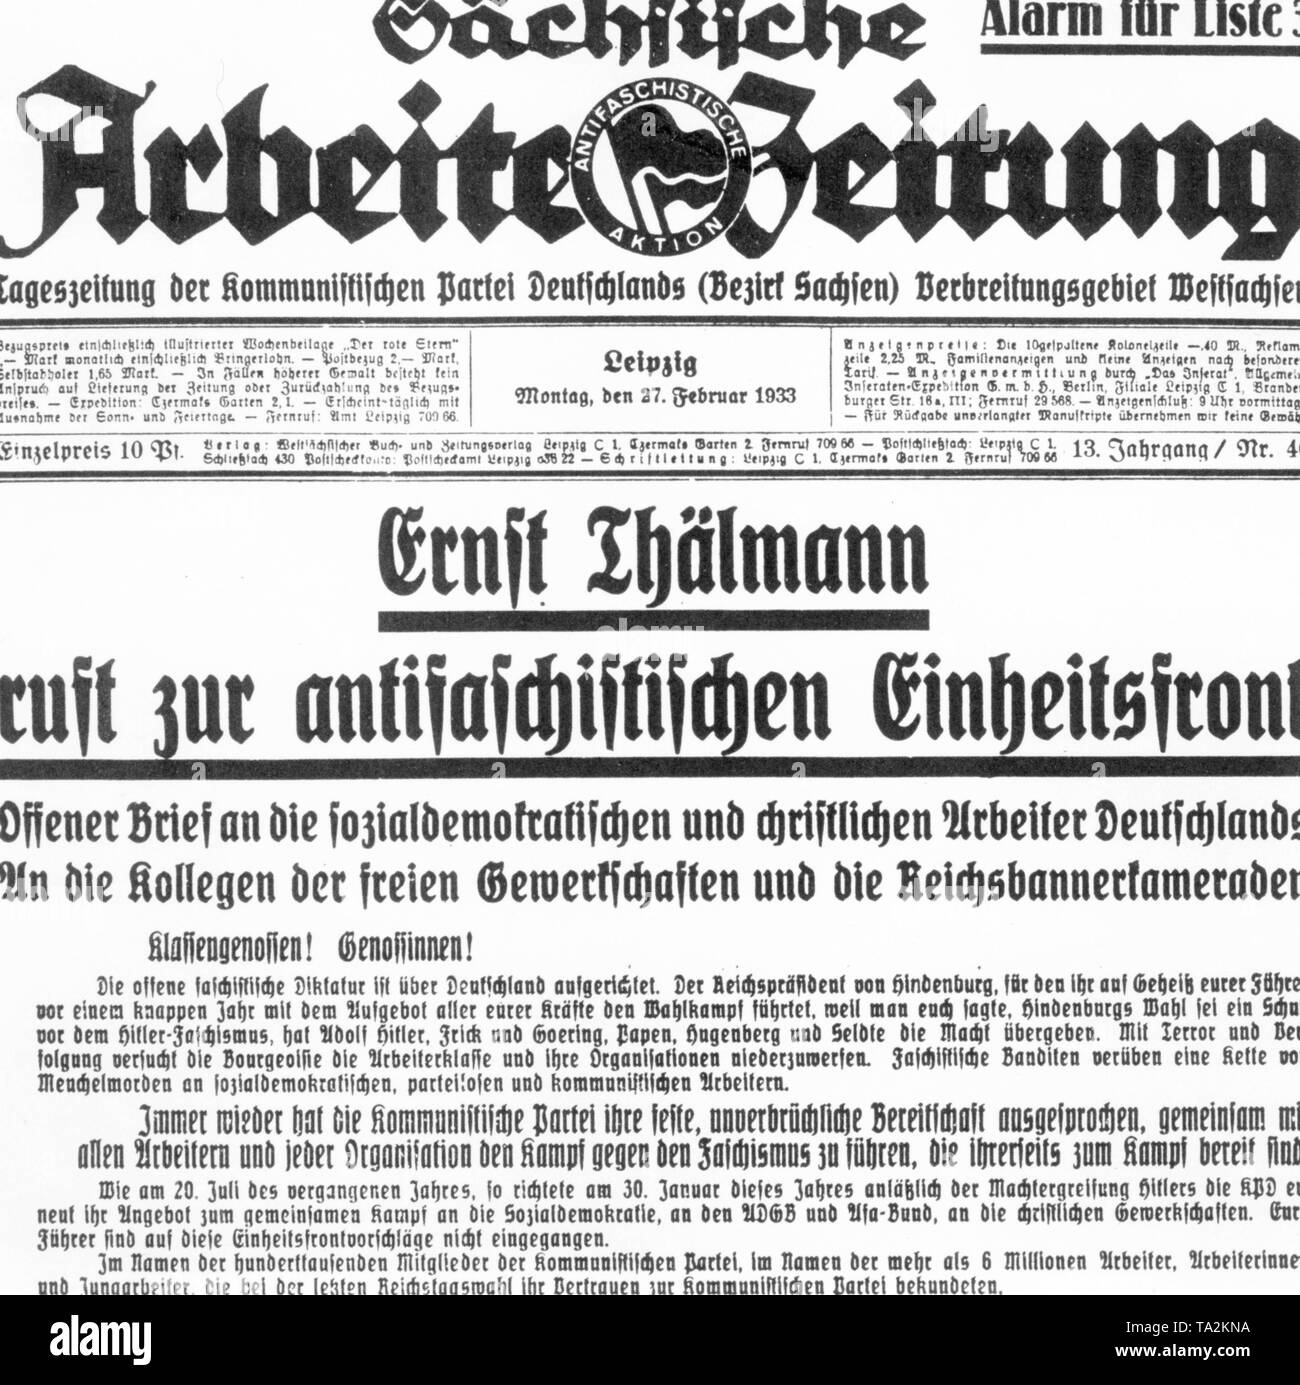 One month after Hitler's take-over, the party chairman of the Communist Party, Ernst Thaelmann, called for the creation of an anti-Fascist Unity Front with Social Democratic and Christian workers. He announced this in an open letter in the 'Saechsischen Arbeiterzeitung'. Stock Photo